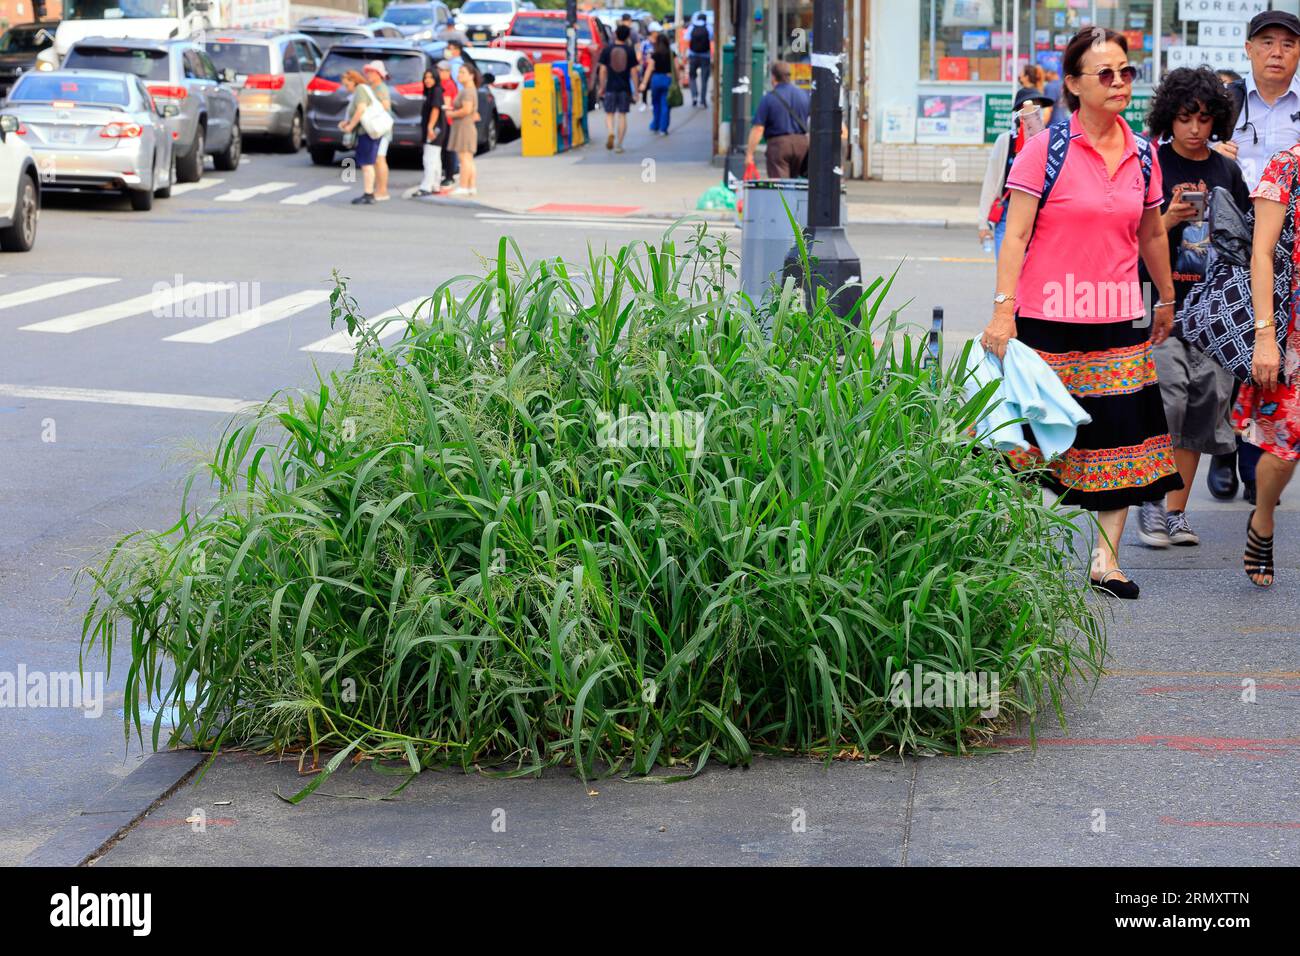 A large patch of Quackgrass, or Couch Grass, Elymus repens (Agropyron repens) growing in a sidewalk tree well in Flushing, Queens, New York City. Stock Photo